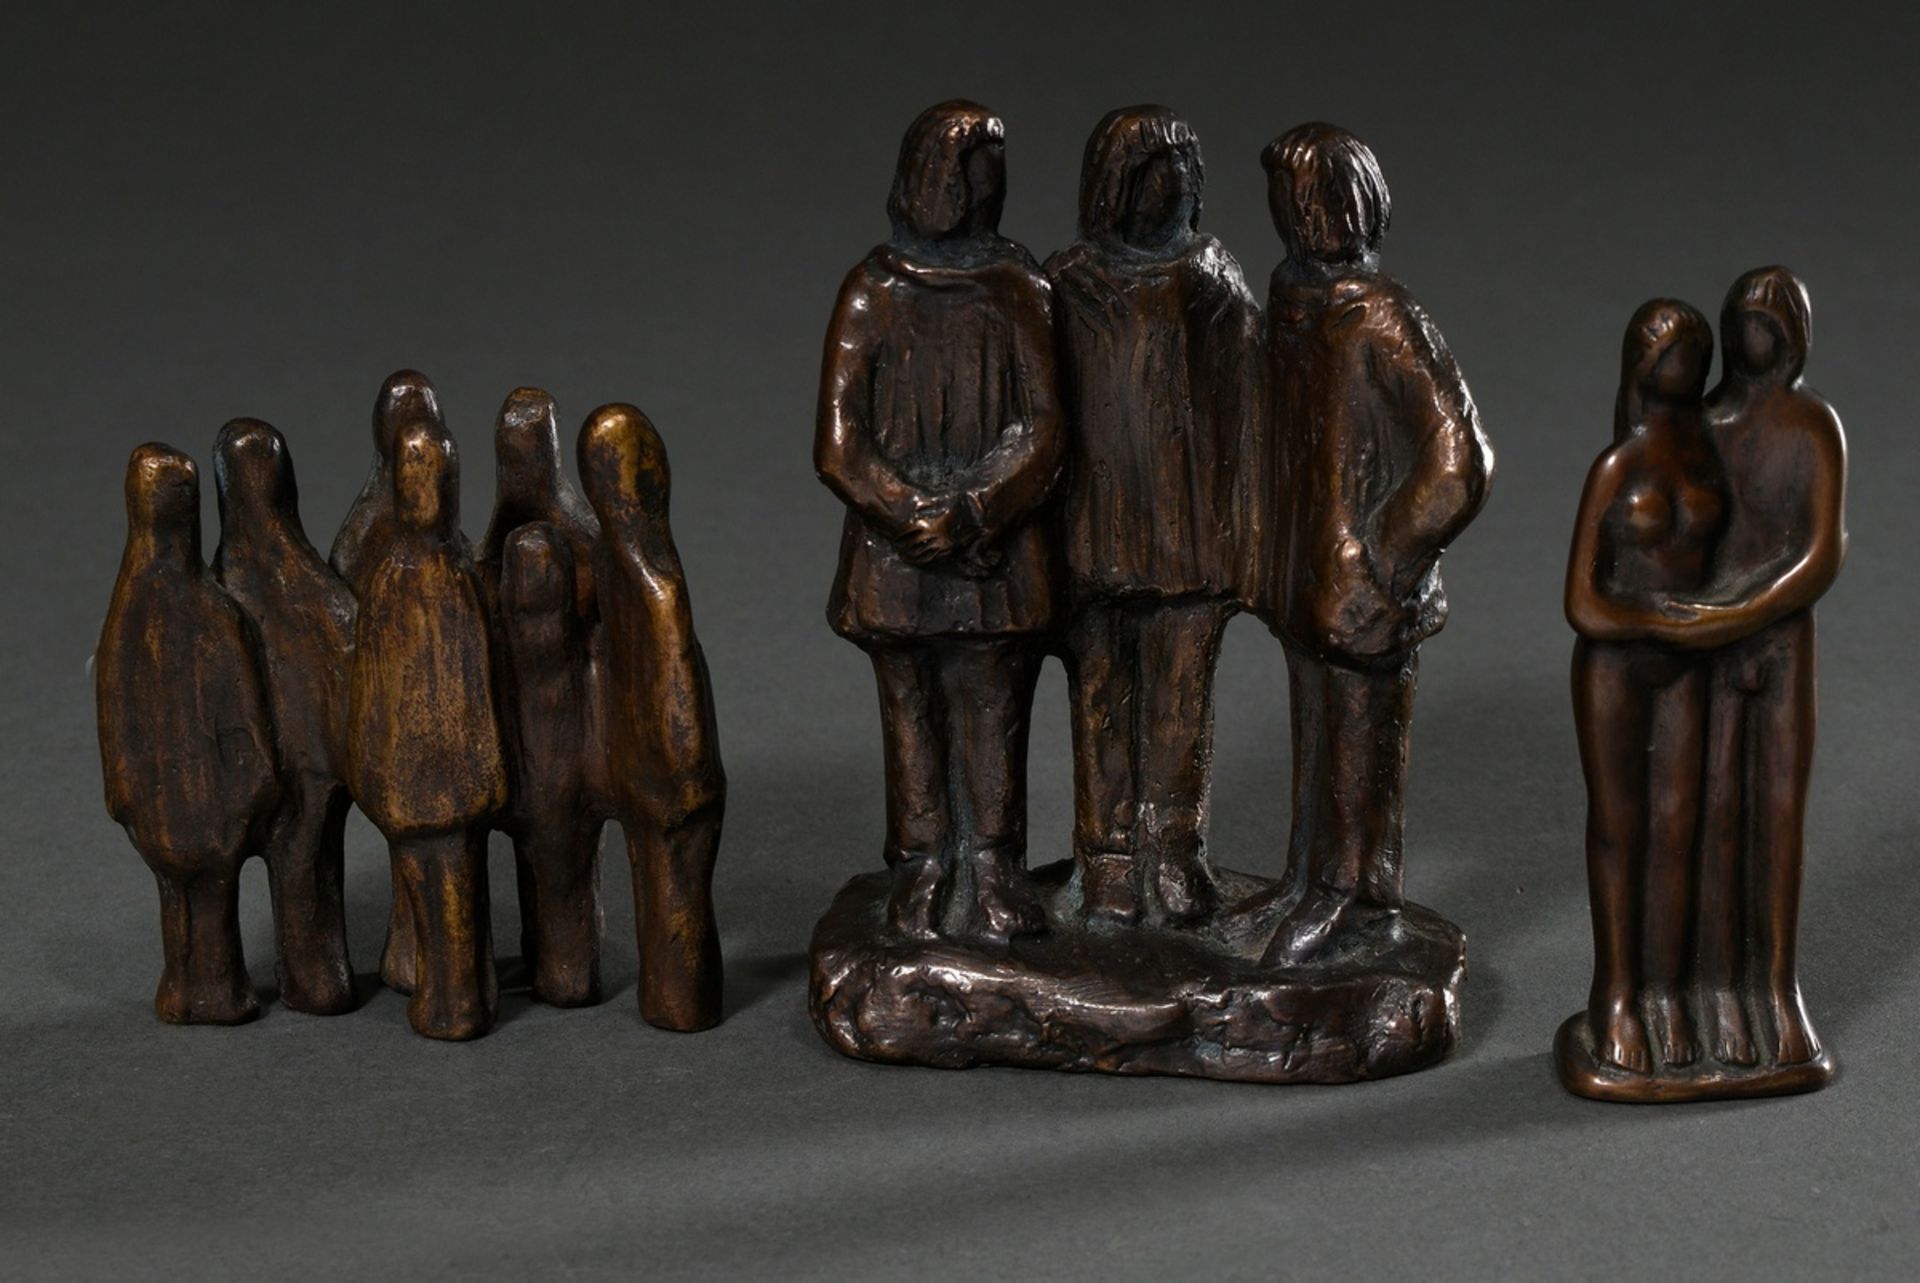 3 Various Maetzel, Monika (1917-2010) figure groups "Three persons", "Seven persons" and "Adam and 